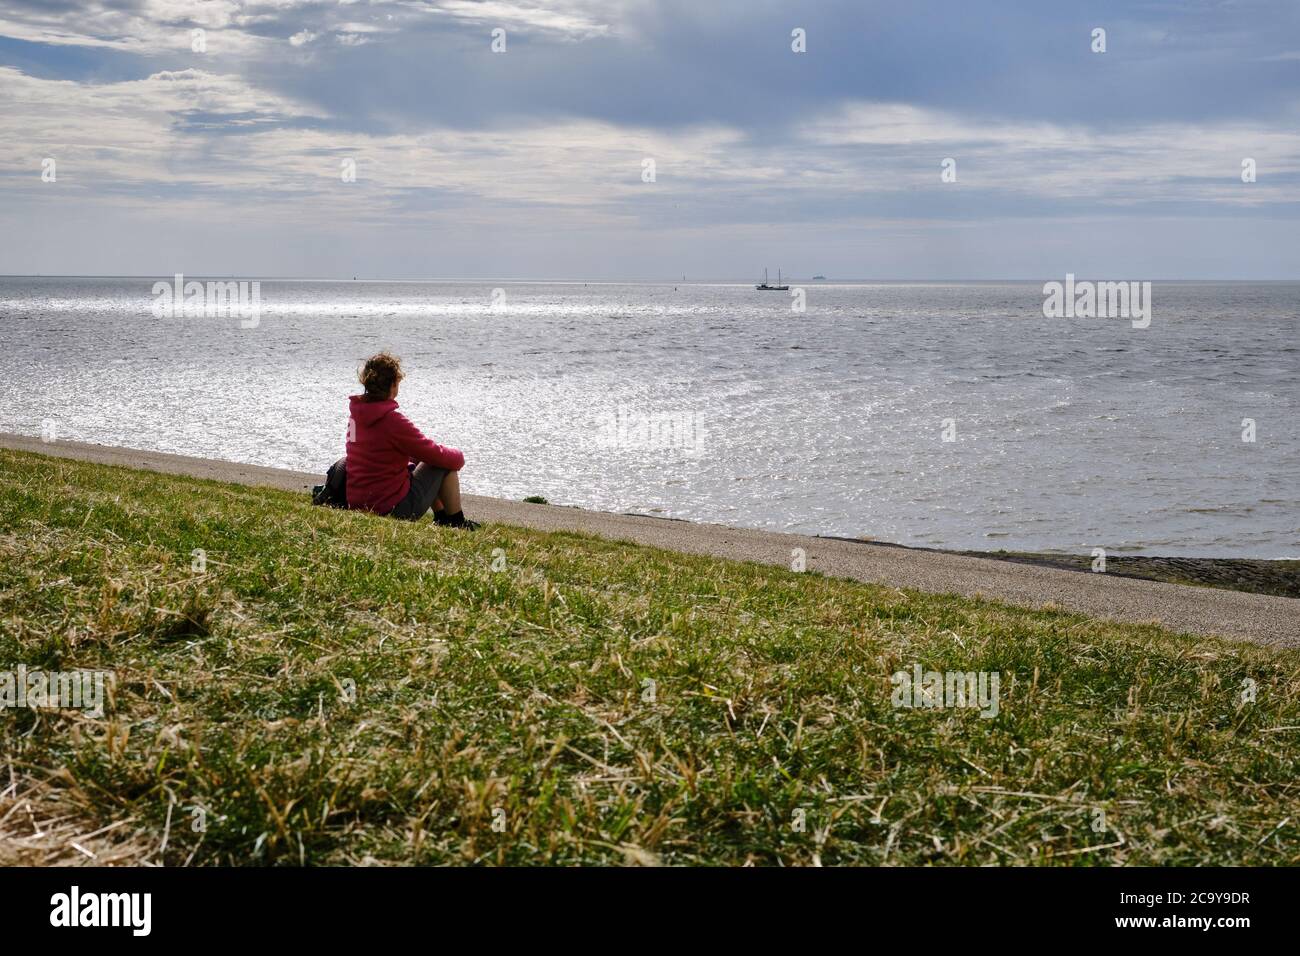 Harlingen,Netherlands,July,23,2020:Silhouette back of young woman on a dike overlooking the Wadden Sea. Thinking of problems during corona crisis Stock Photo